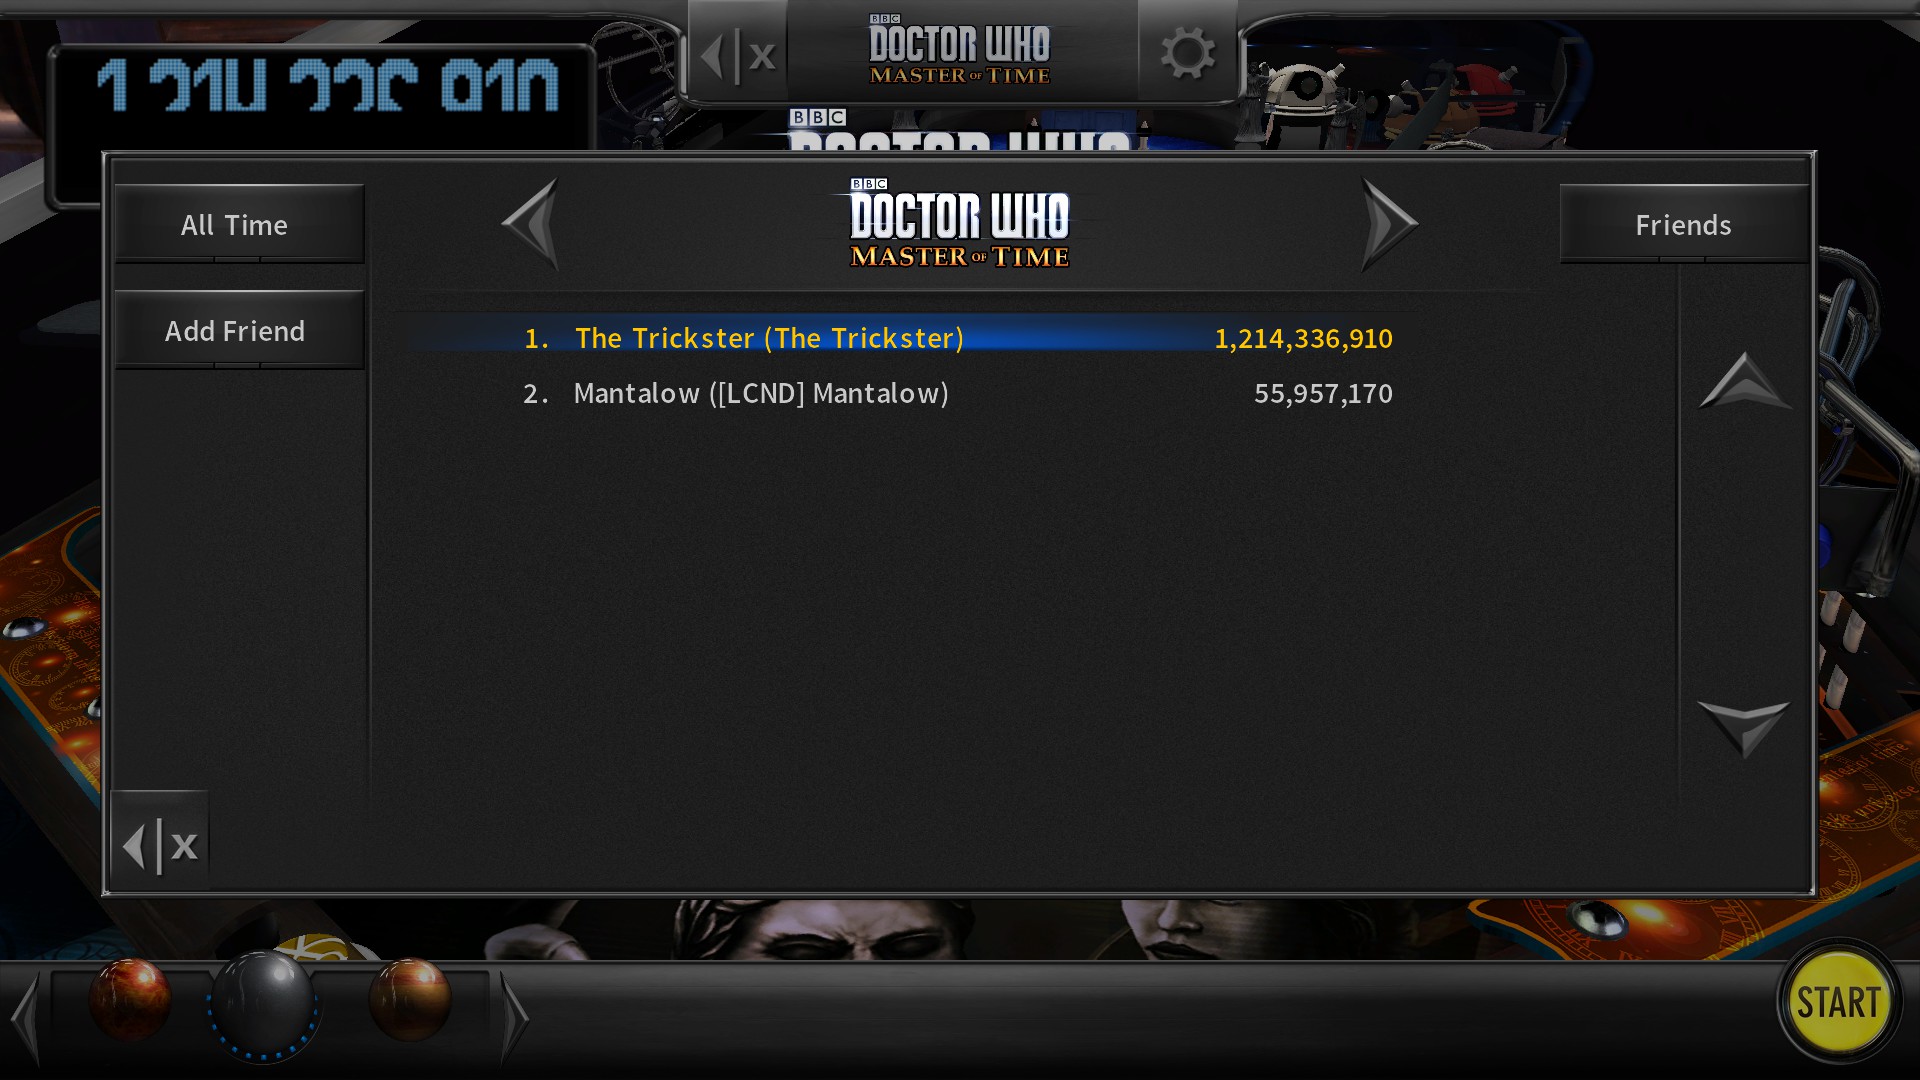 Pinball Arcade: Doctor Who: Master of Time 1,214,336,910 points